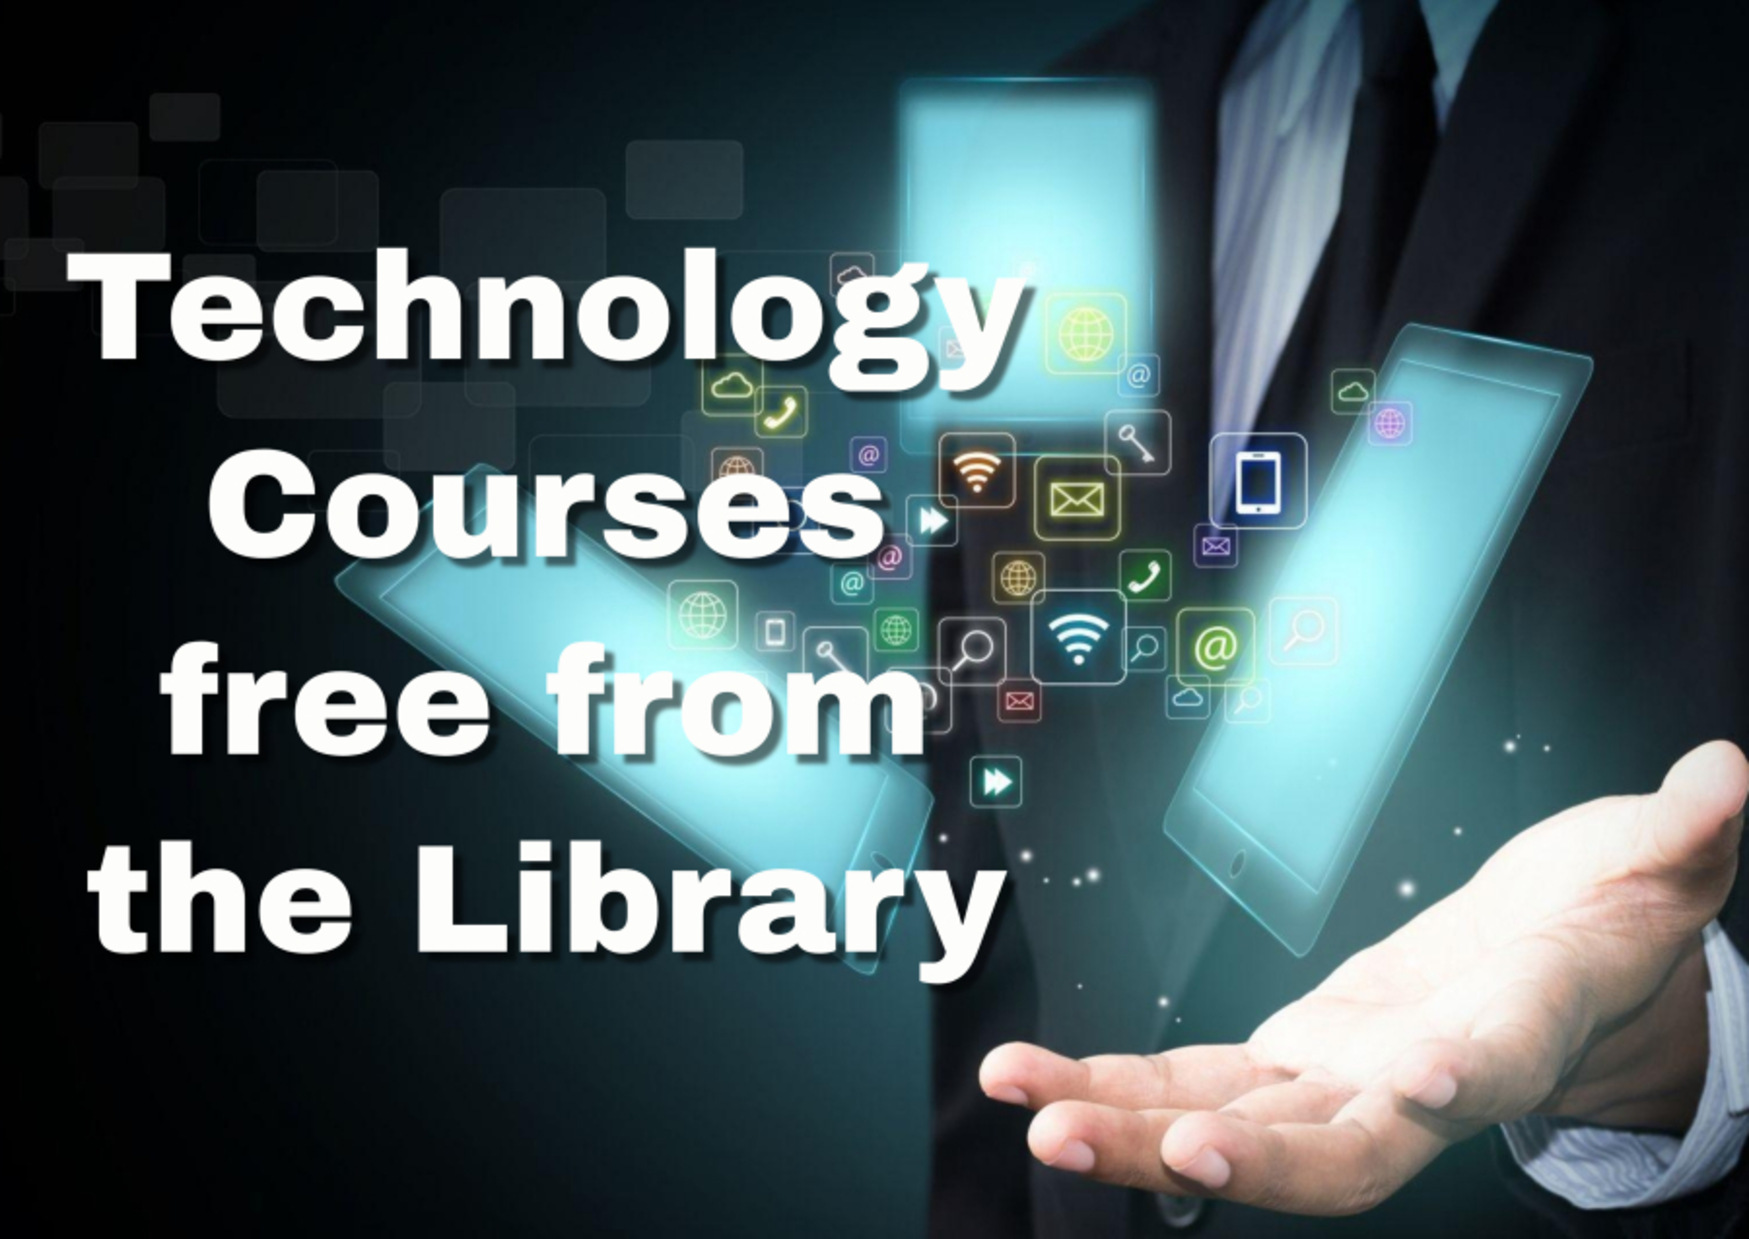 Technology Courses!